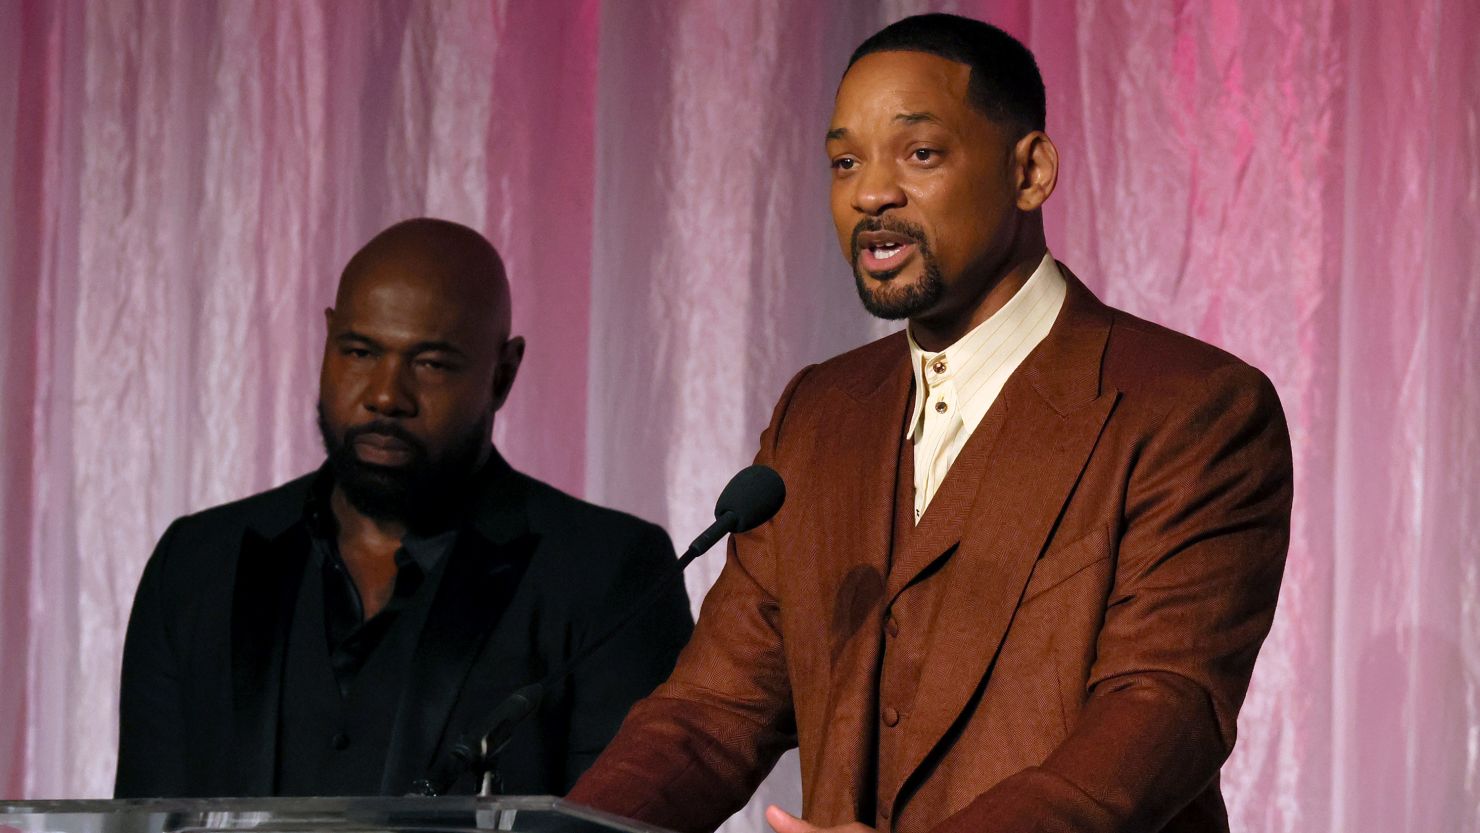 Honorees Antoine Fuqua (left) and Will Smith accept The Beacon Award for "Emancipation" onstage during the 14th Annual AAFCA Awards on Wednesday.